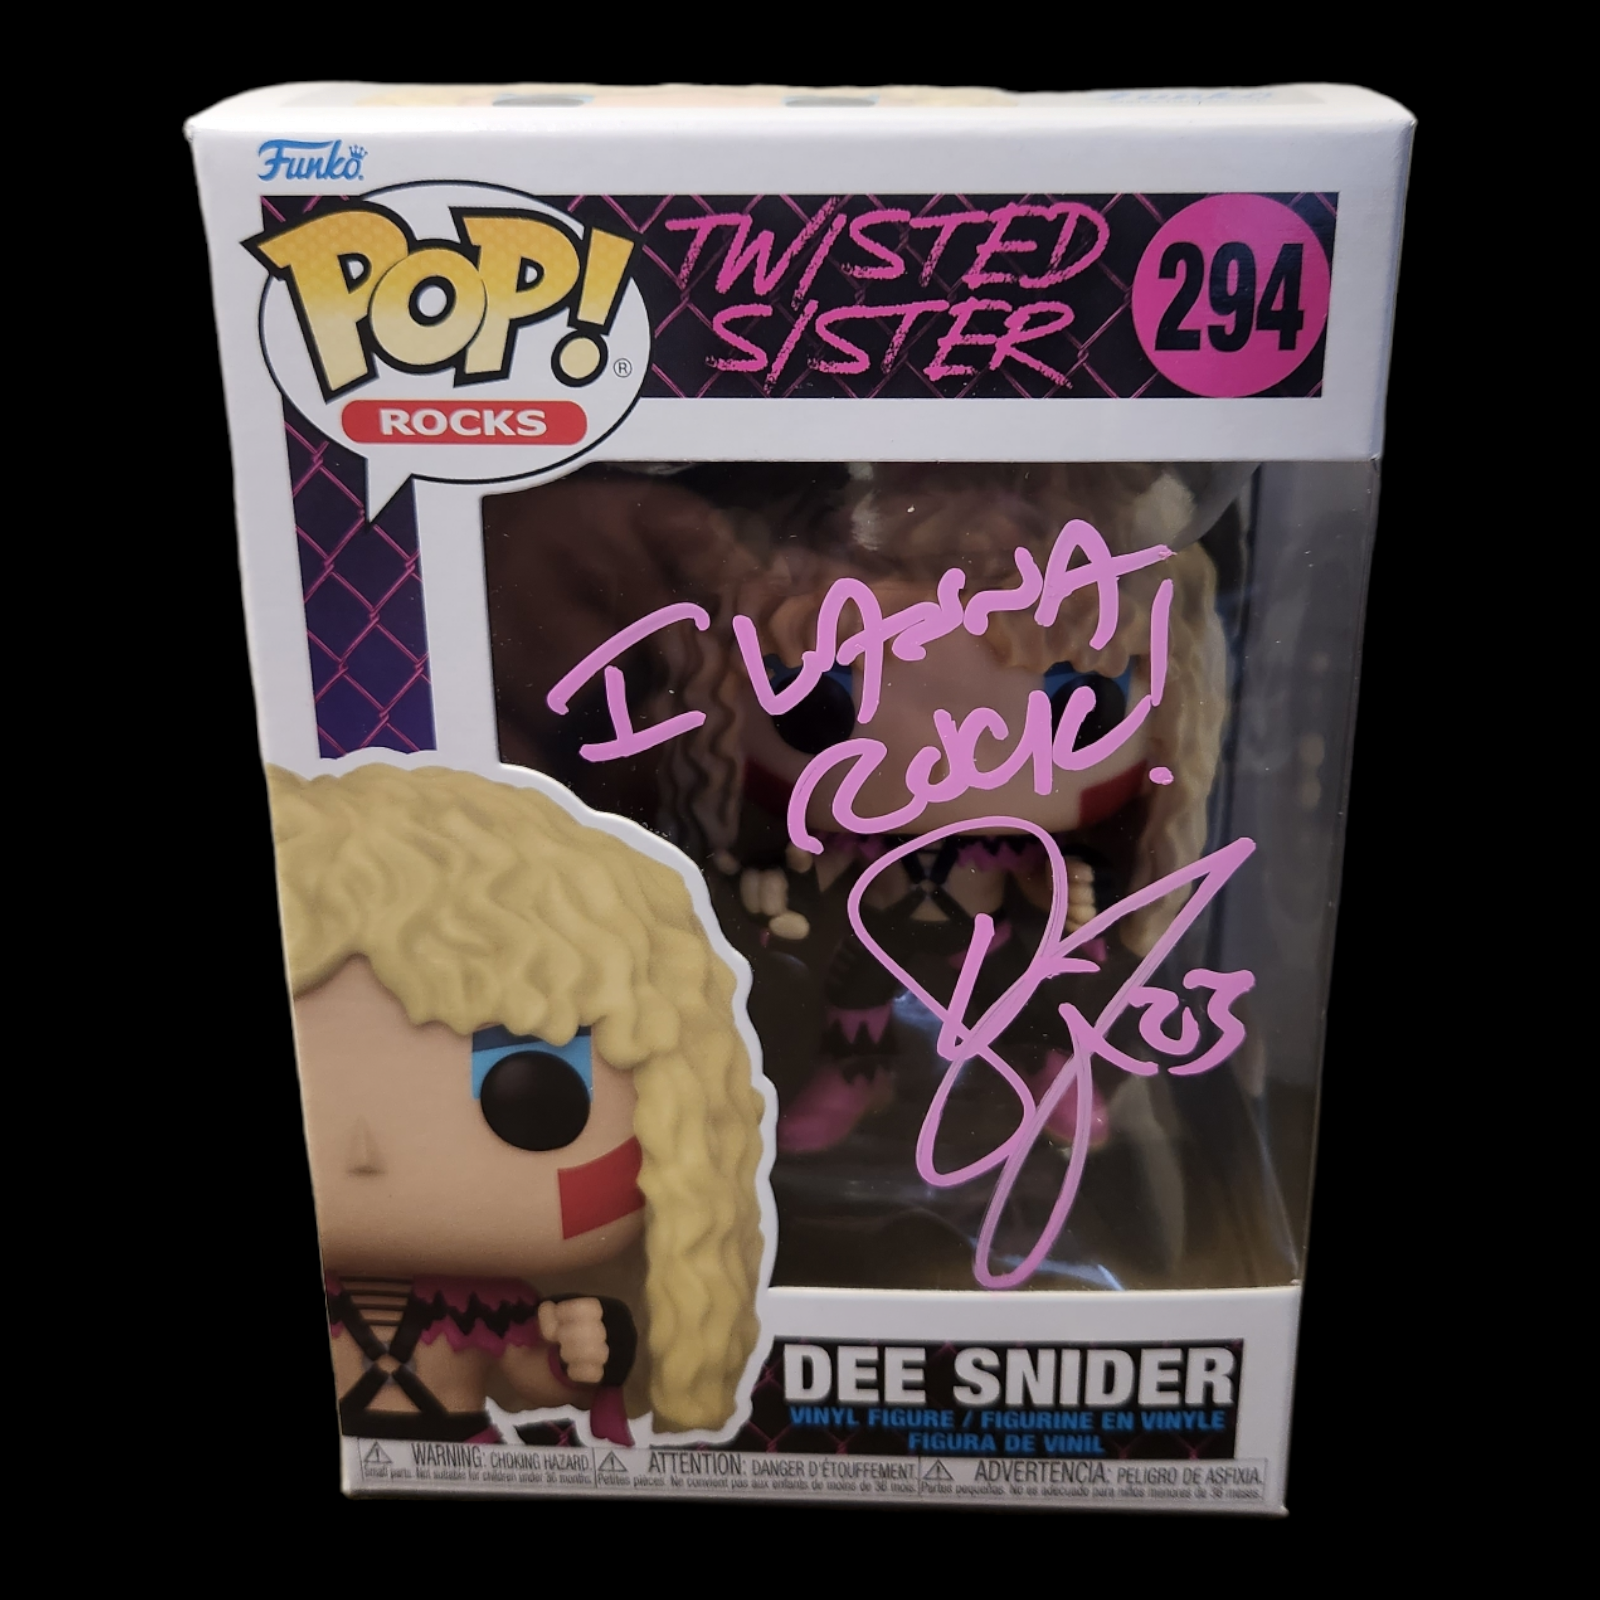 Signed Pop by Dee Snider of Twisted Sister!